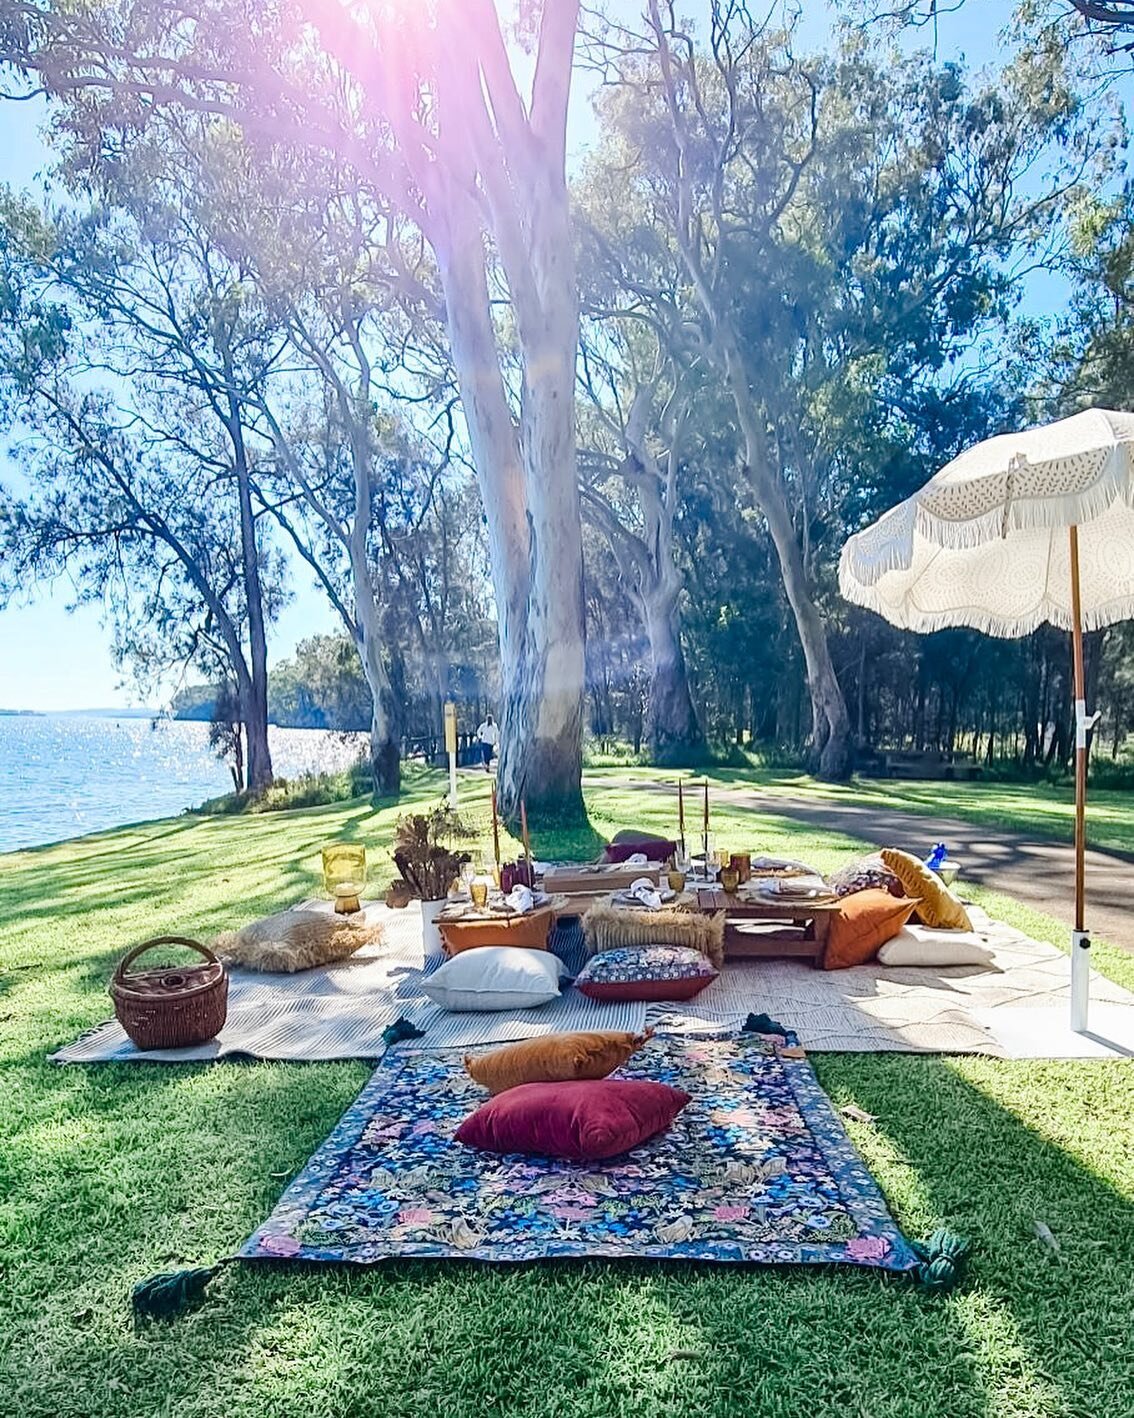 Ooh, heaven is a place on earth. 🌿🧺 #LaBoheme

Looking for a special way to celebrate or get together with your favourite people? 

Enquiries: hello@luxelakeside.com

🏷️

#luxurypicnic #picnicsetup #picnicstyling #bohopicnic #lakemacquarie